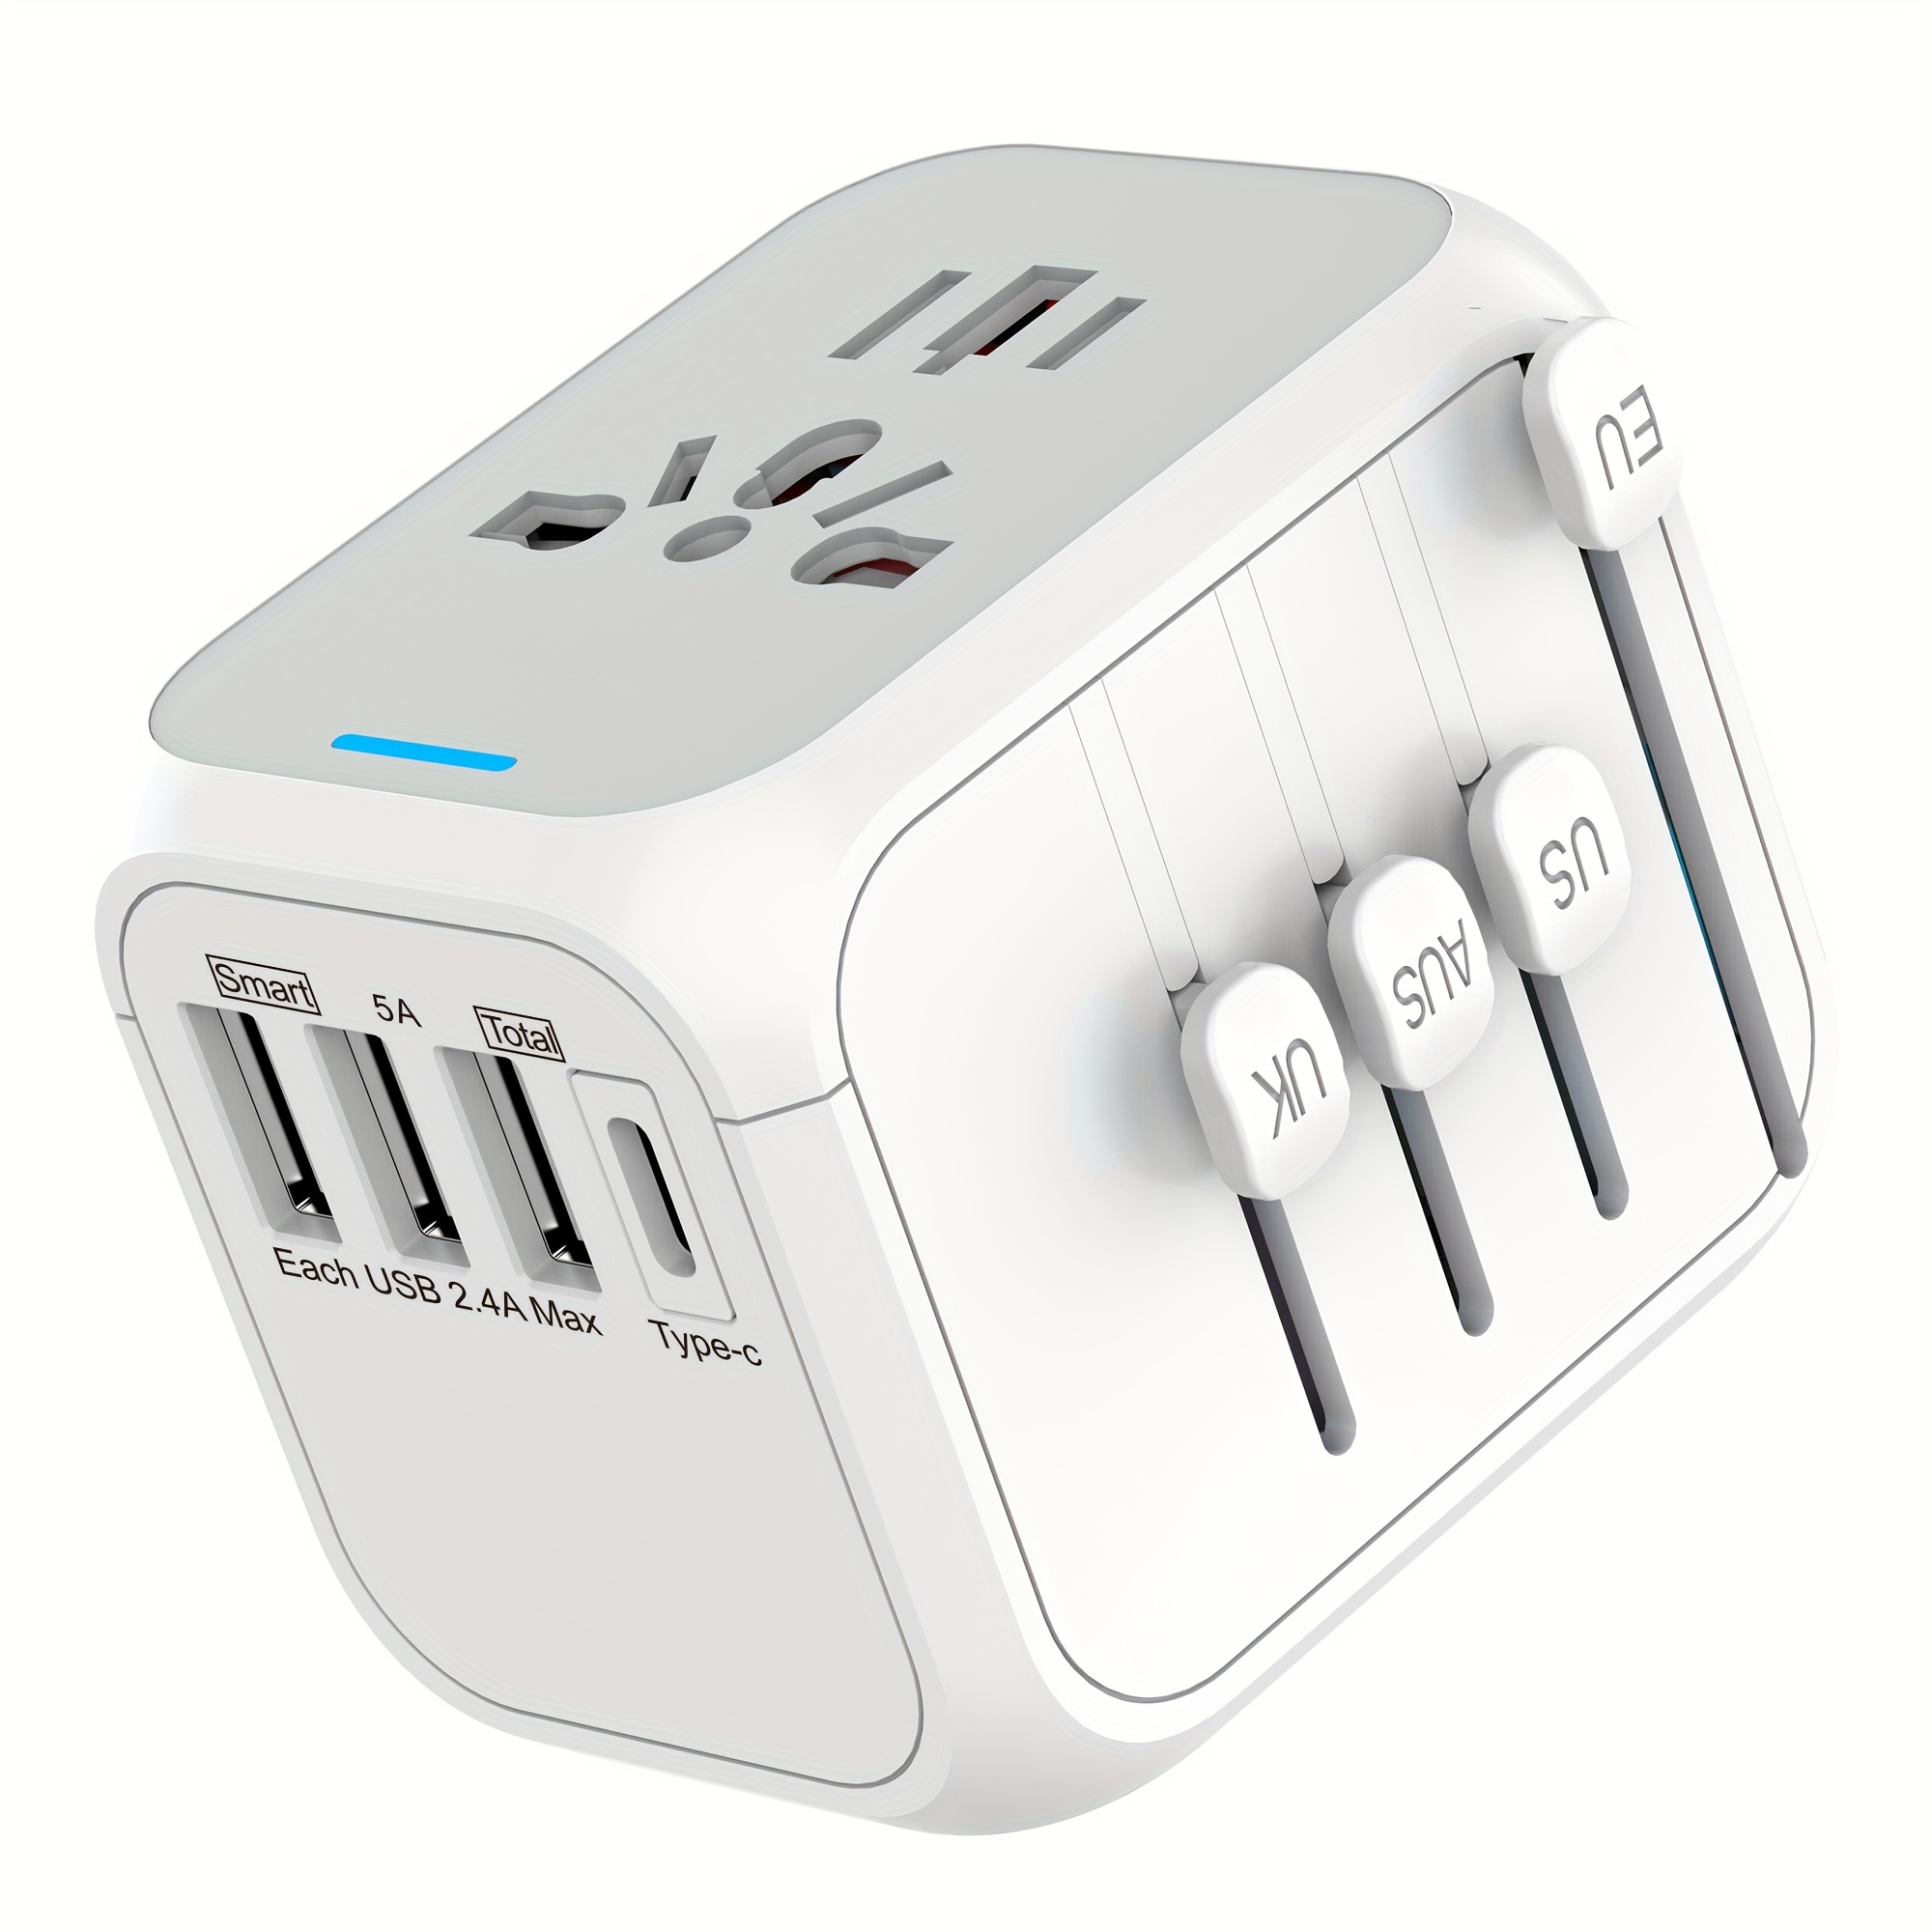 1pc Universal International Travel Plug Adapter With USB-C, US To European  UK AUS Asia Worldwide Travel Adapter, AC Outlets Plug Converters, 3 USB 1